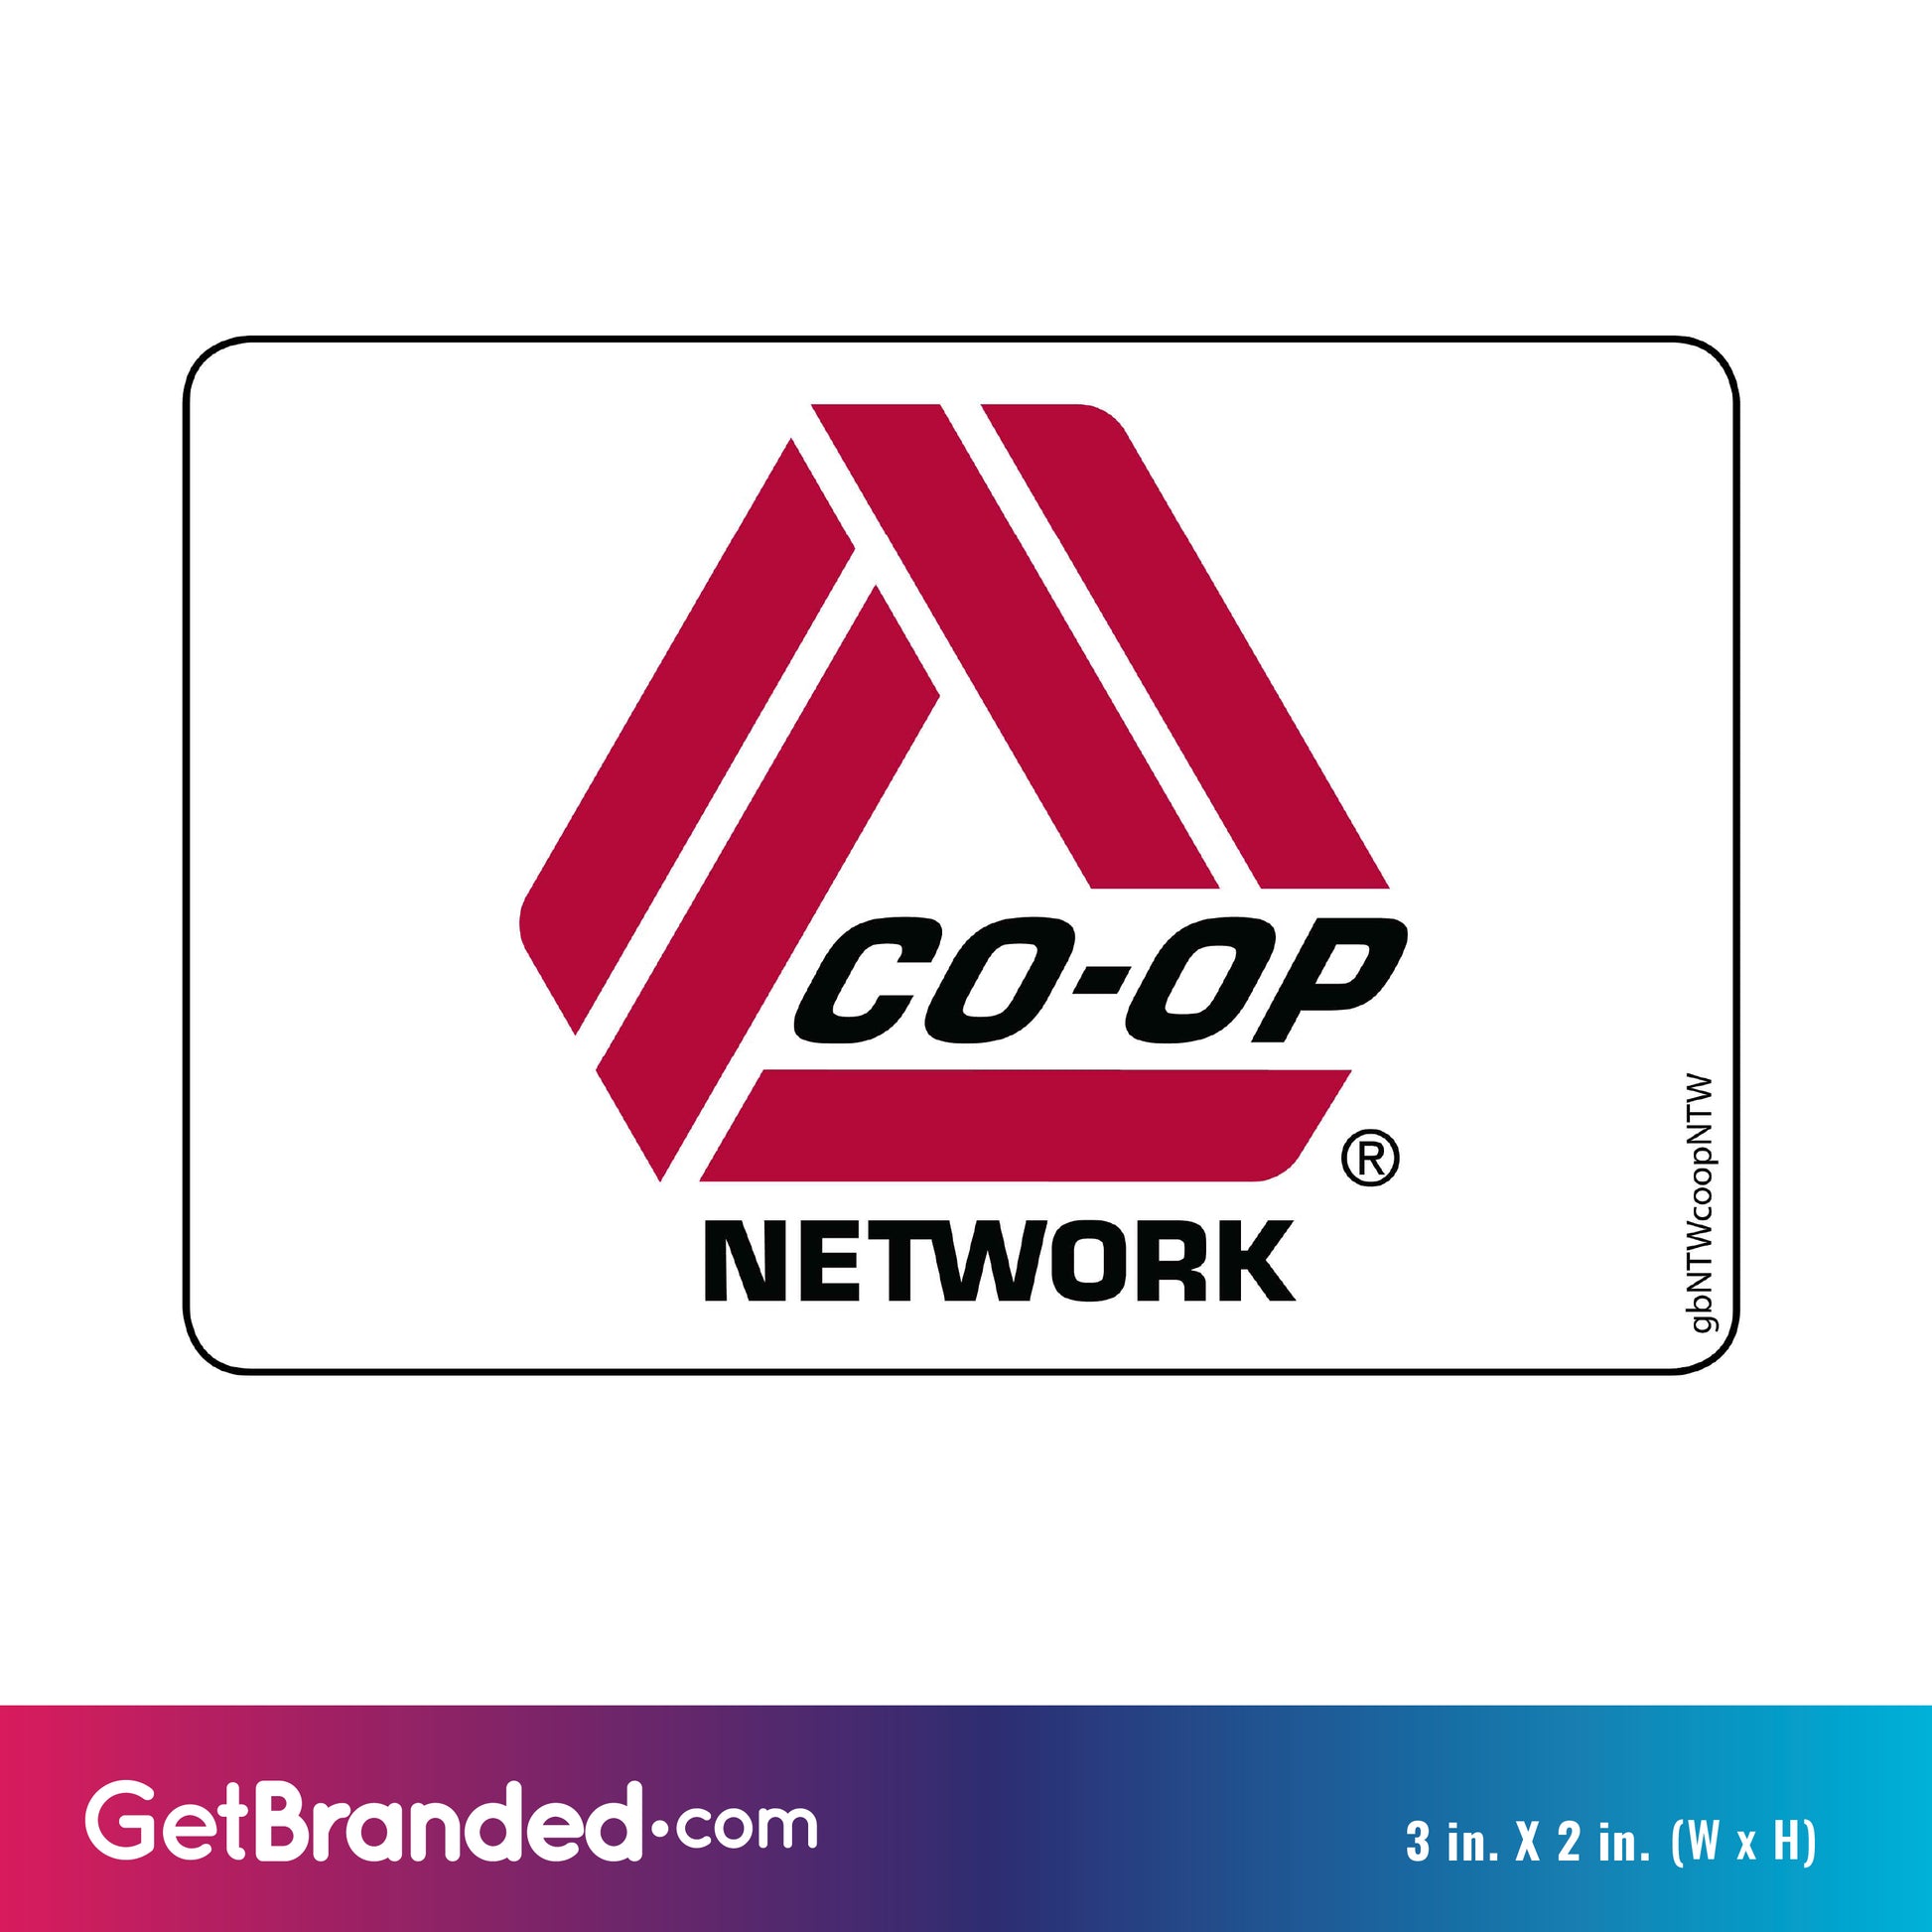 Single Network Decal, Co-op Network size guide.